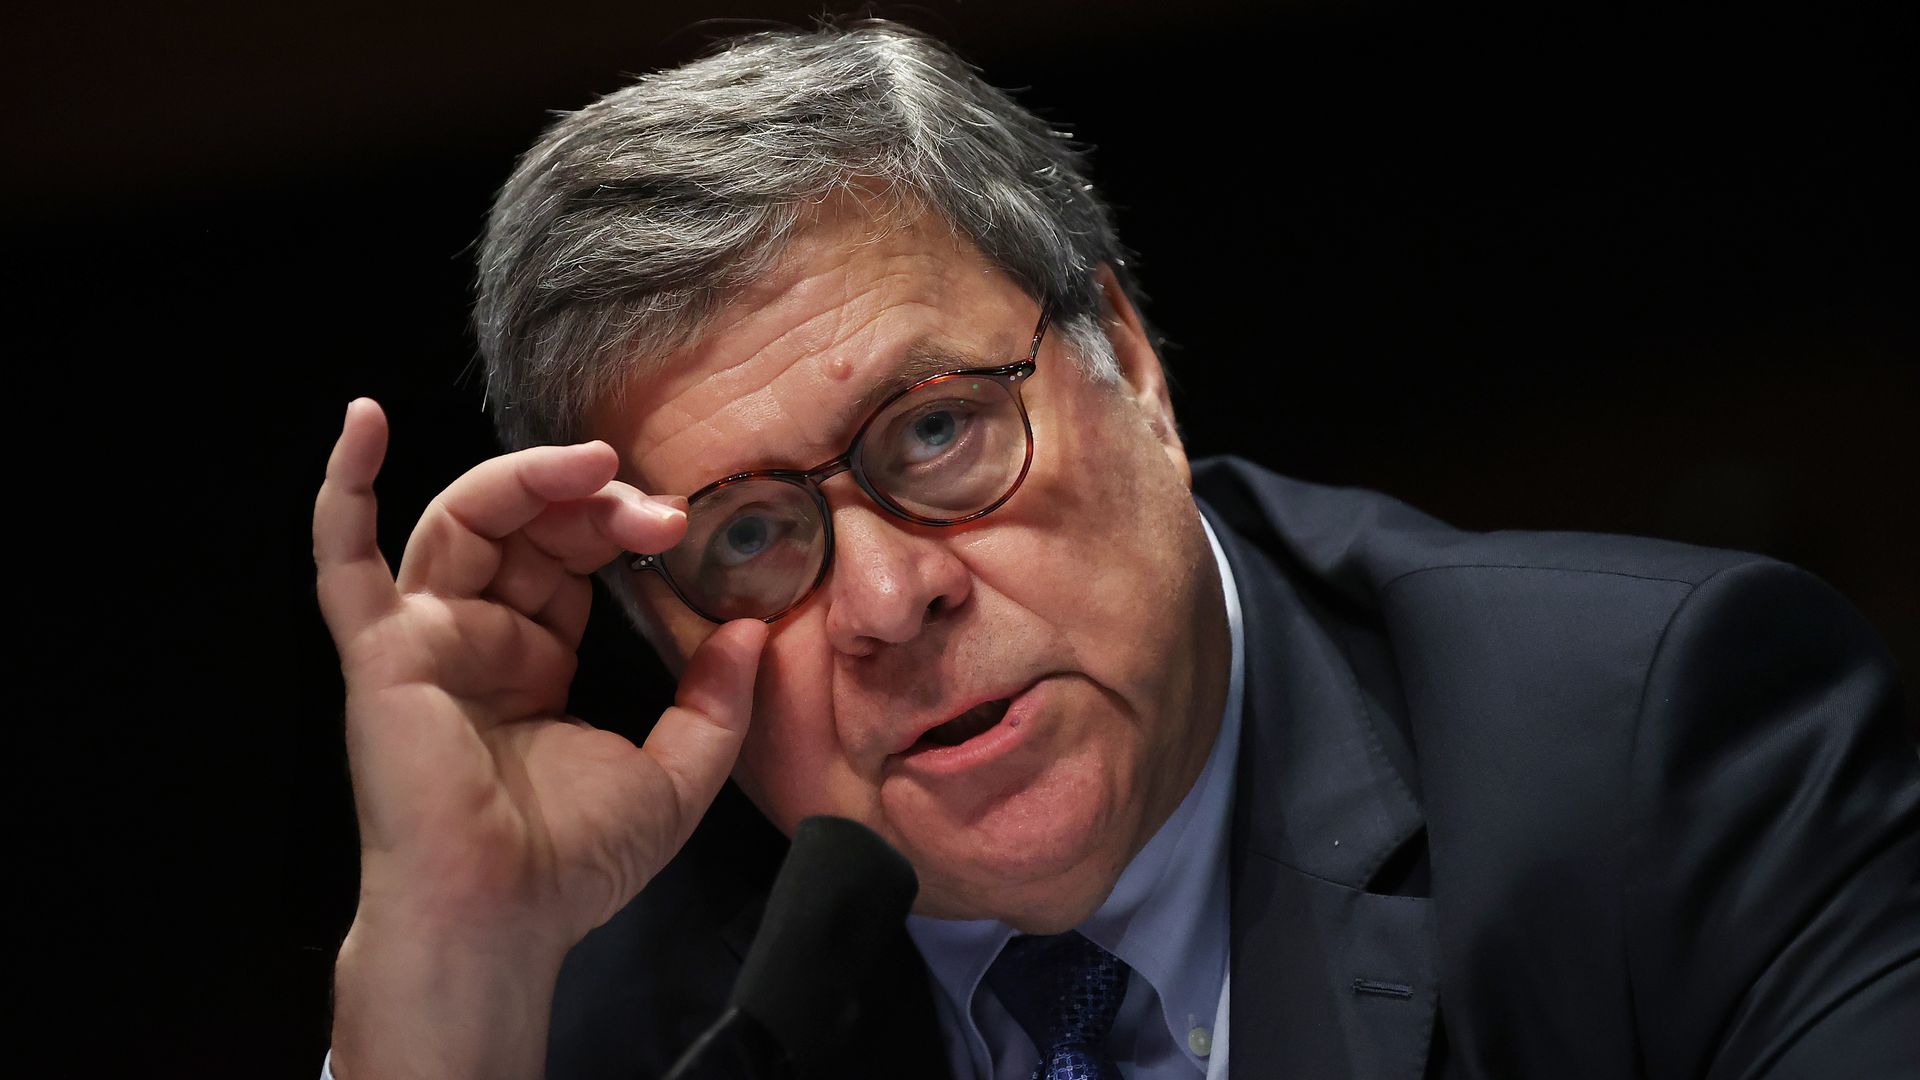 Bill Barr adjusts his glasses while wearing a suit and tie 